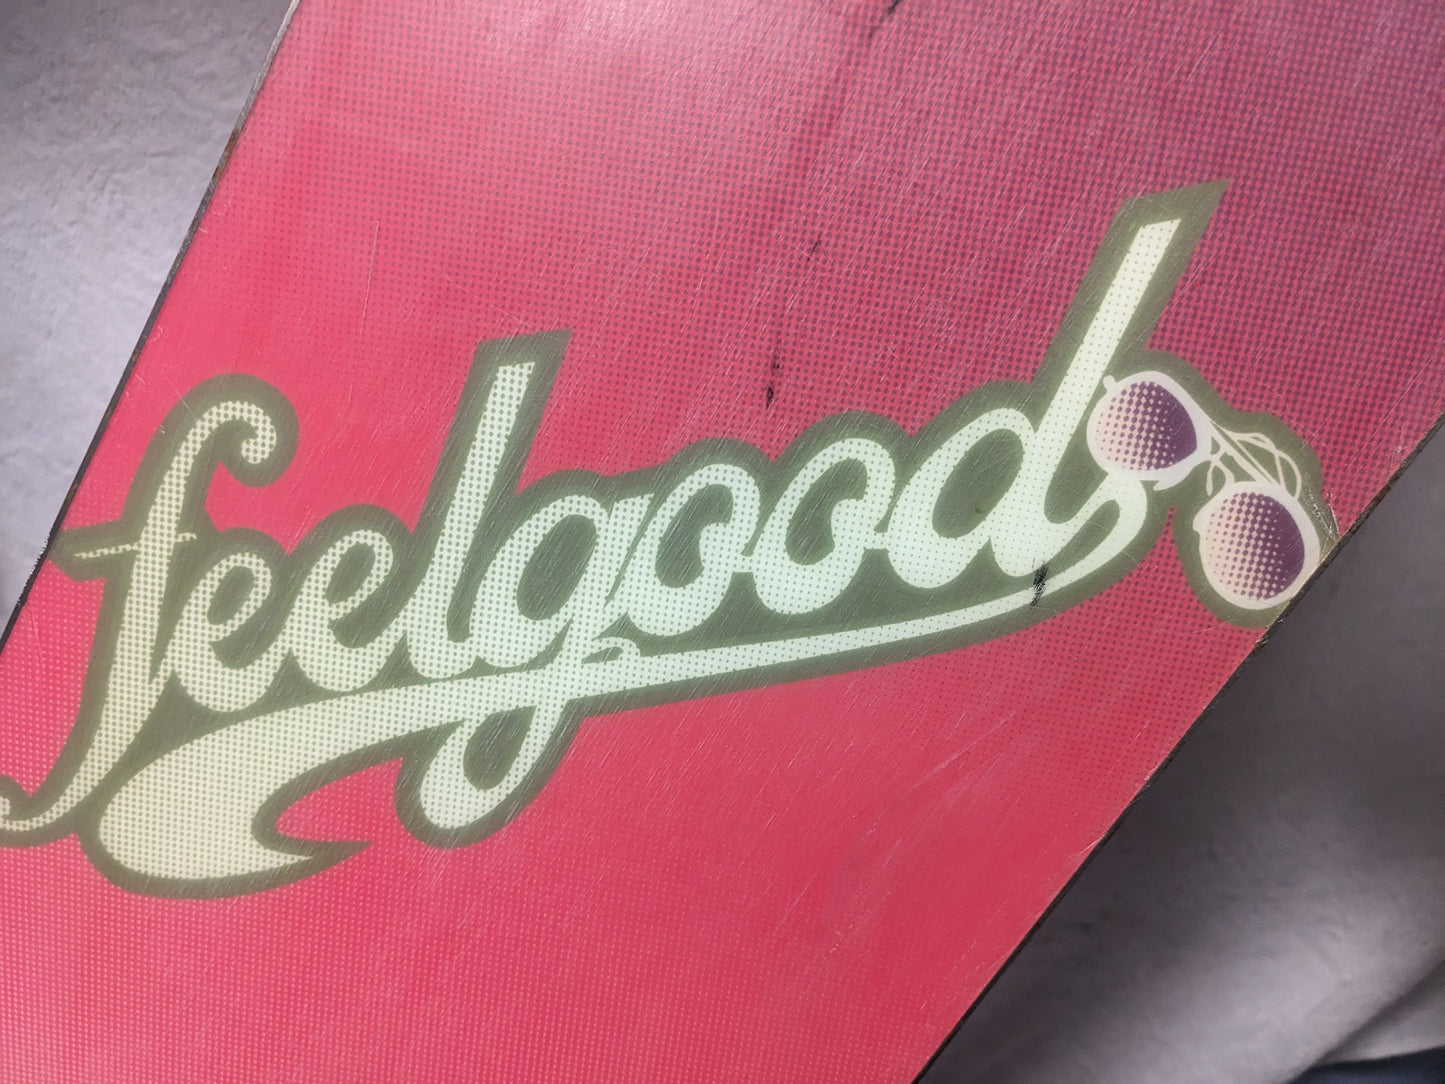 Burton Feelgood Snowboard *Deck Only*No Bindings* Size 152 Cm Color Purple Condition Used